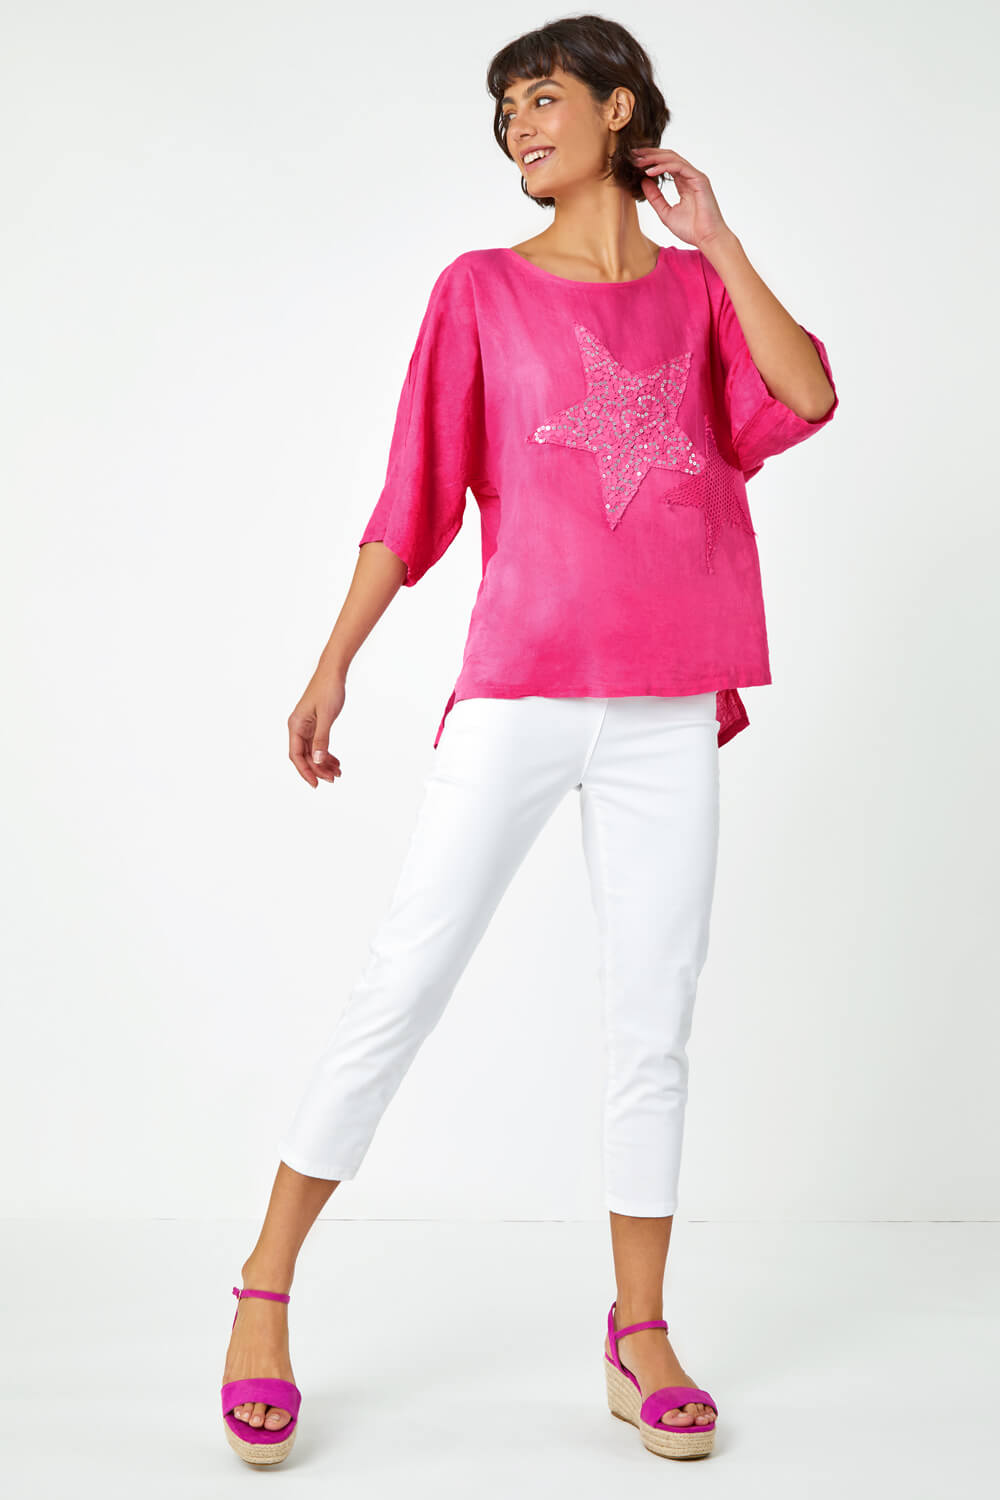 PINK Sequin Star Print Tunic Top , Image 2 of 5